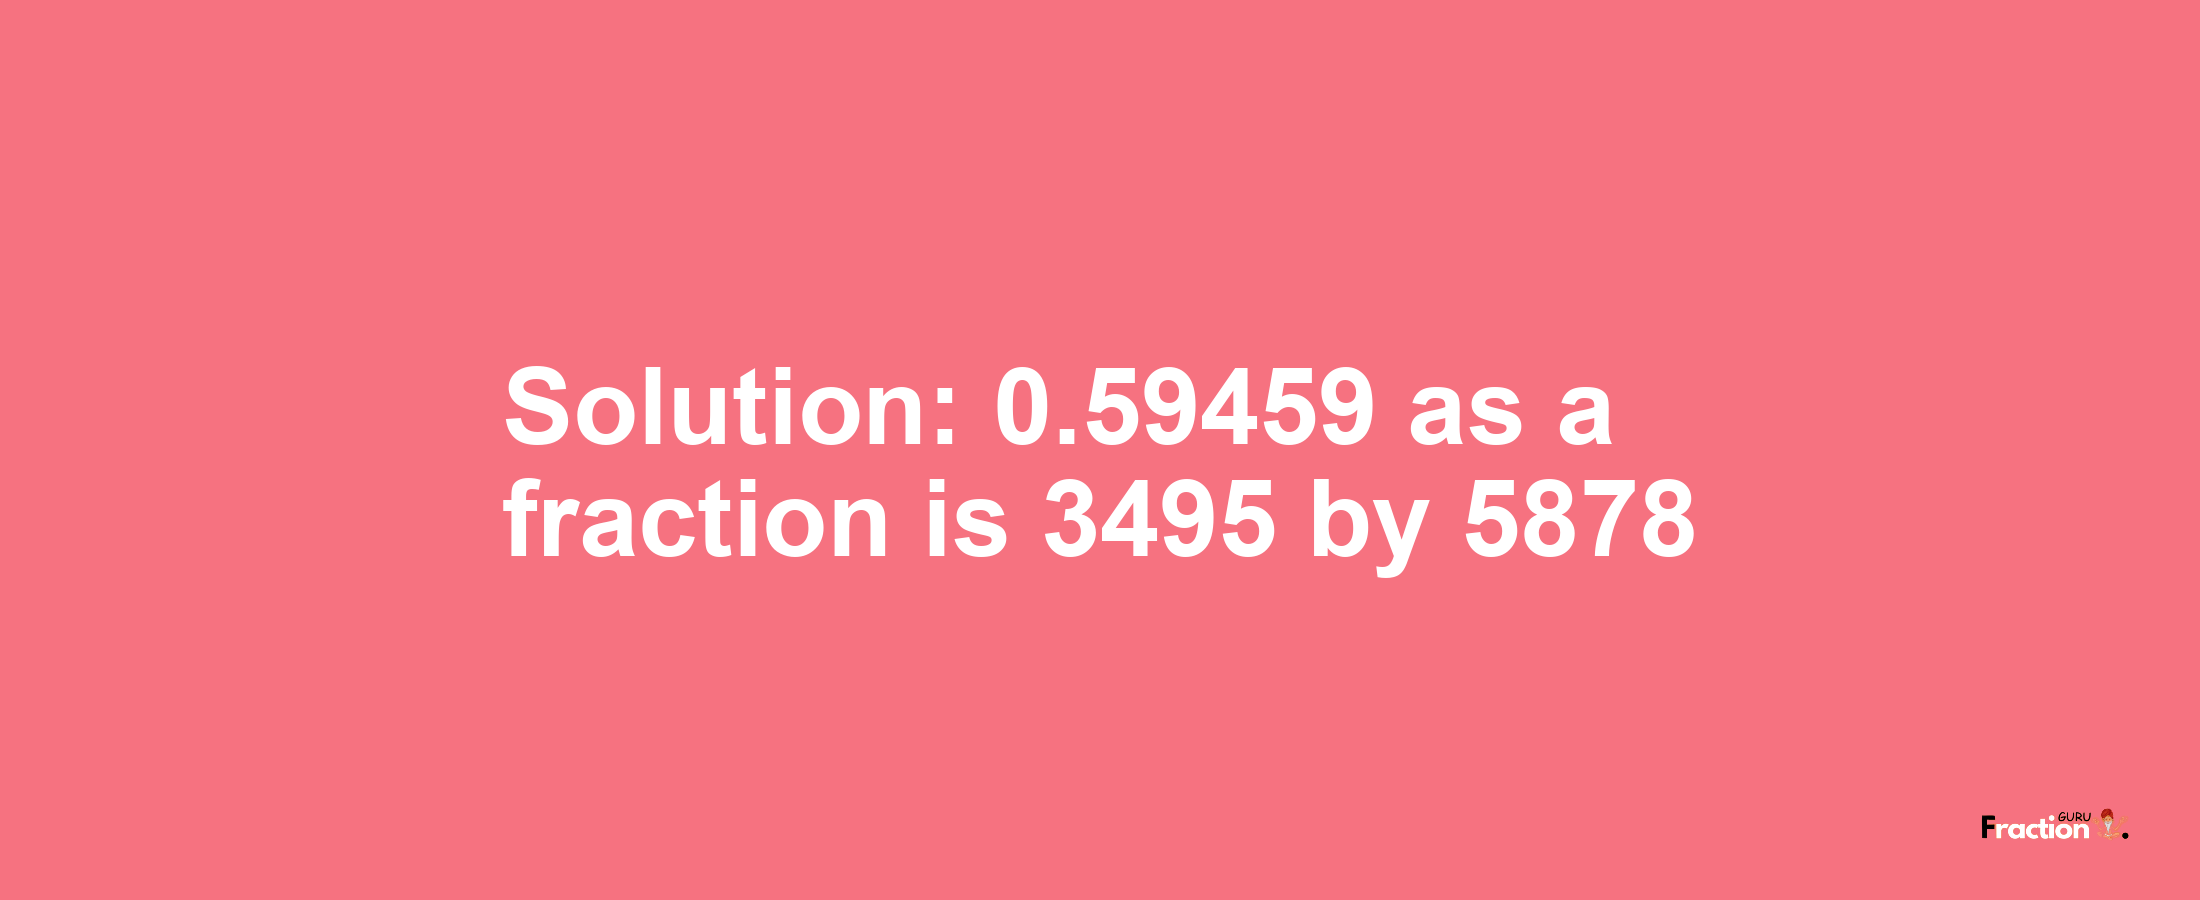 Solution:0.59459 as a fraction is 3495/5878